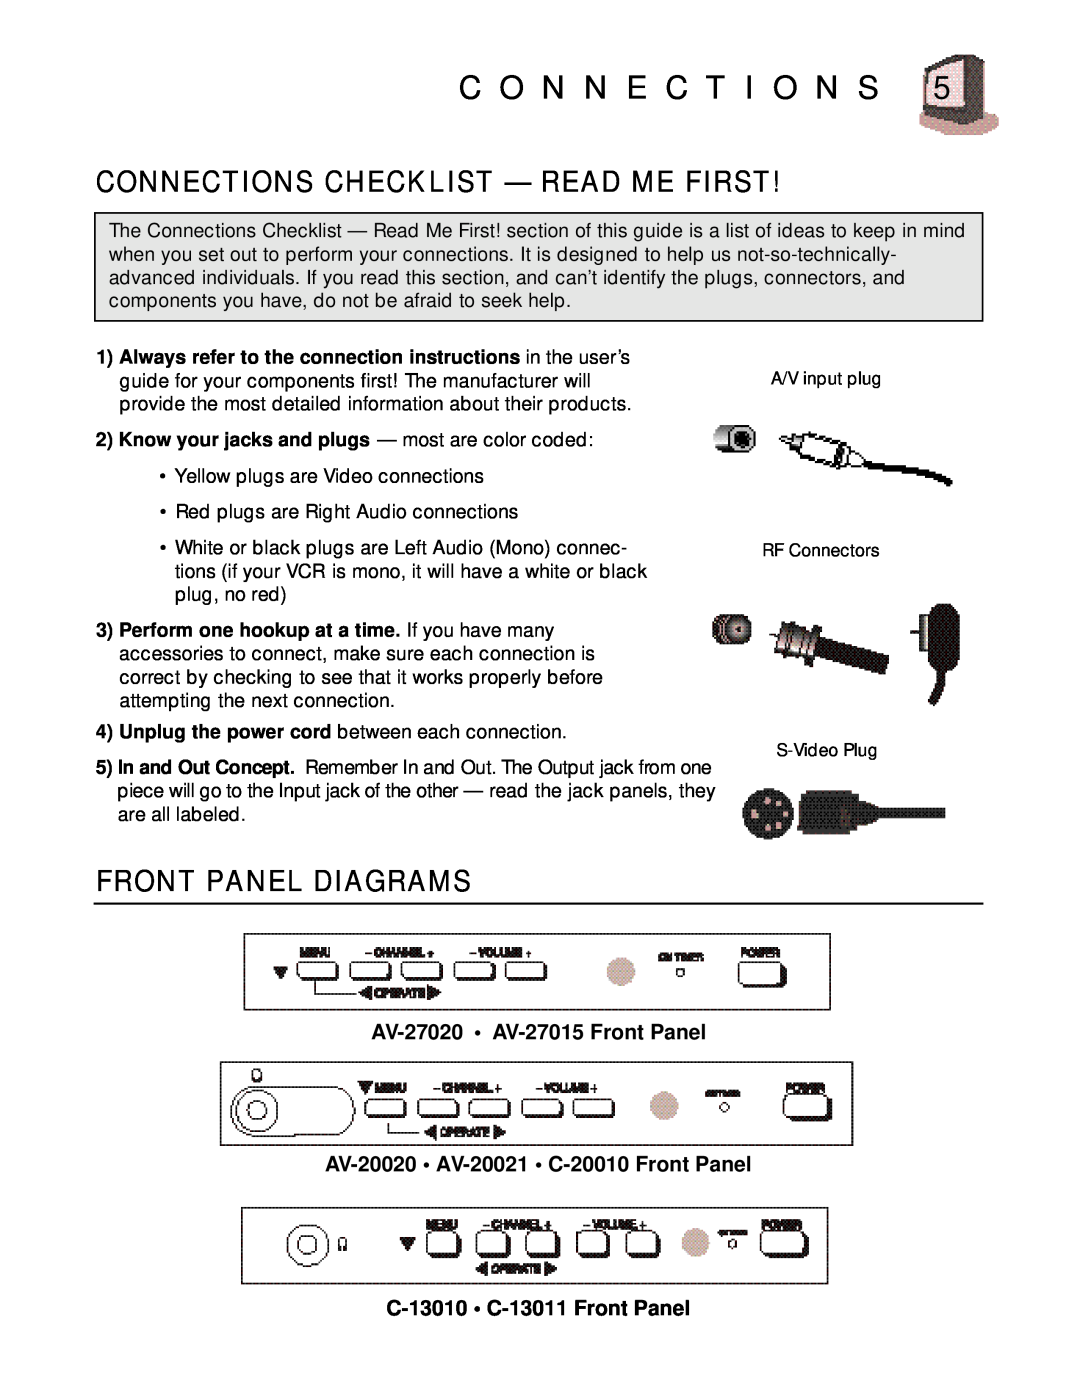 JVC AV-20021, C 13011, C-20010, C-13010 C O N N E C T I O N S, Connections Checklist - Read Me First, Front Panel Diagrams 